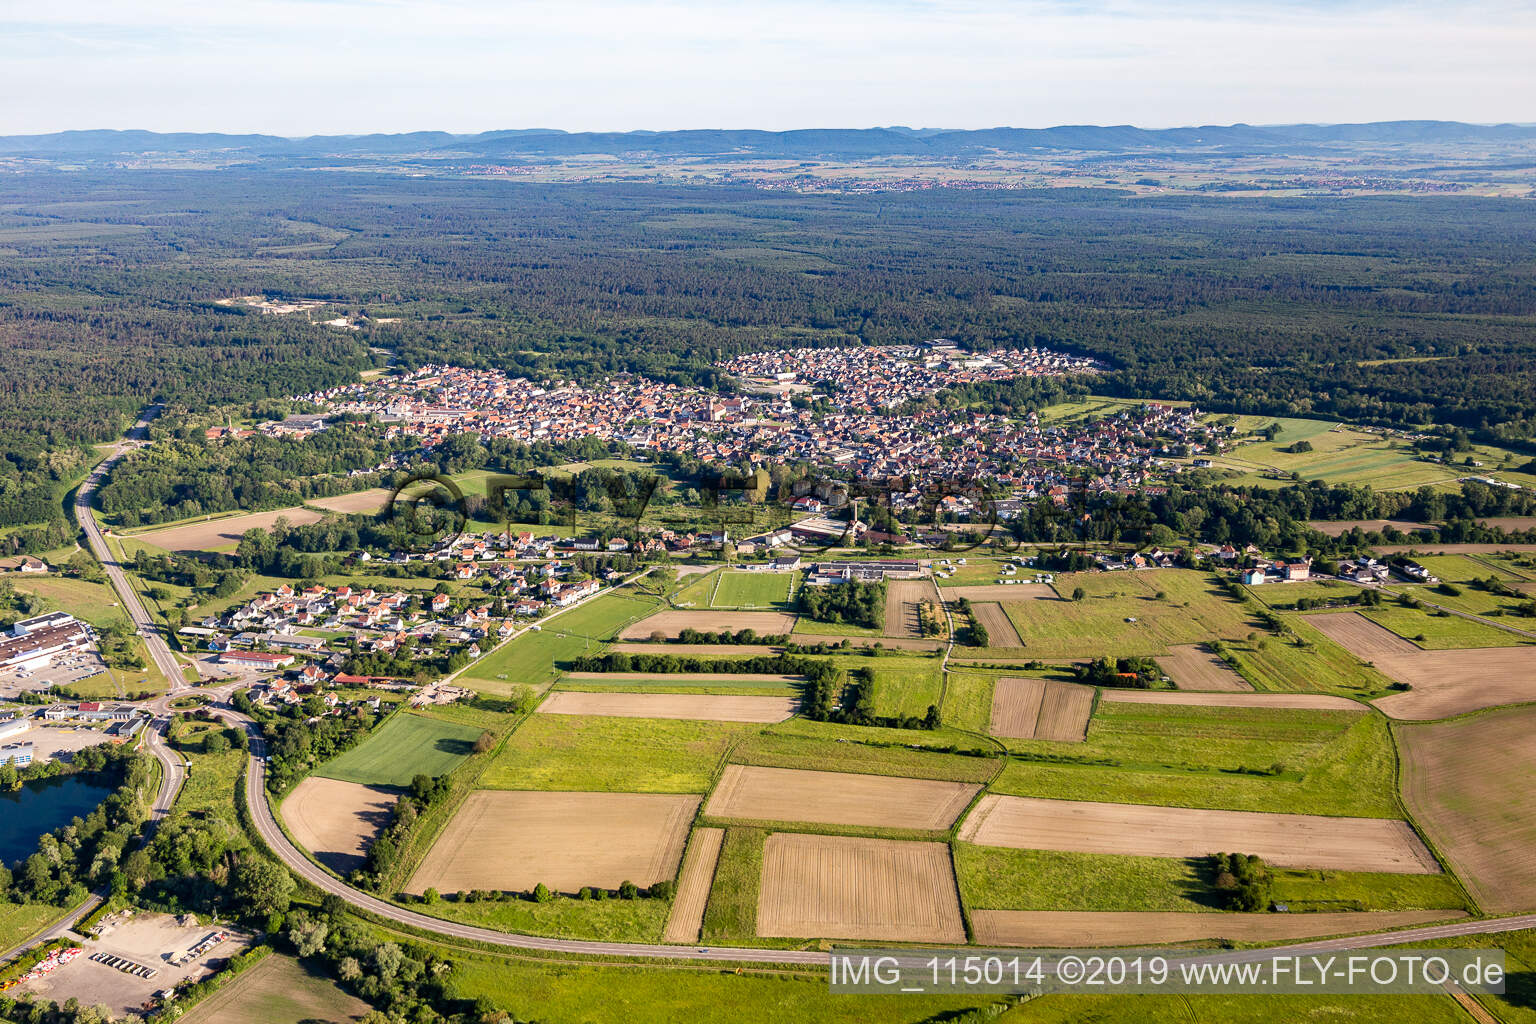 Drone recording of Soufflenheim in the state Bas-Rhin, France